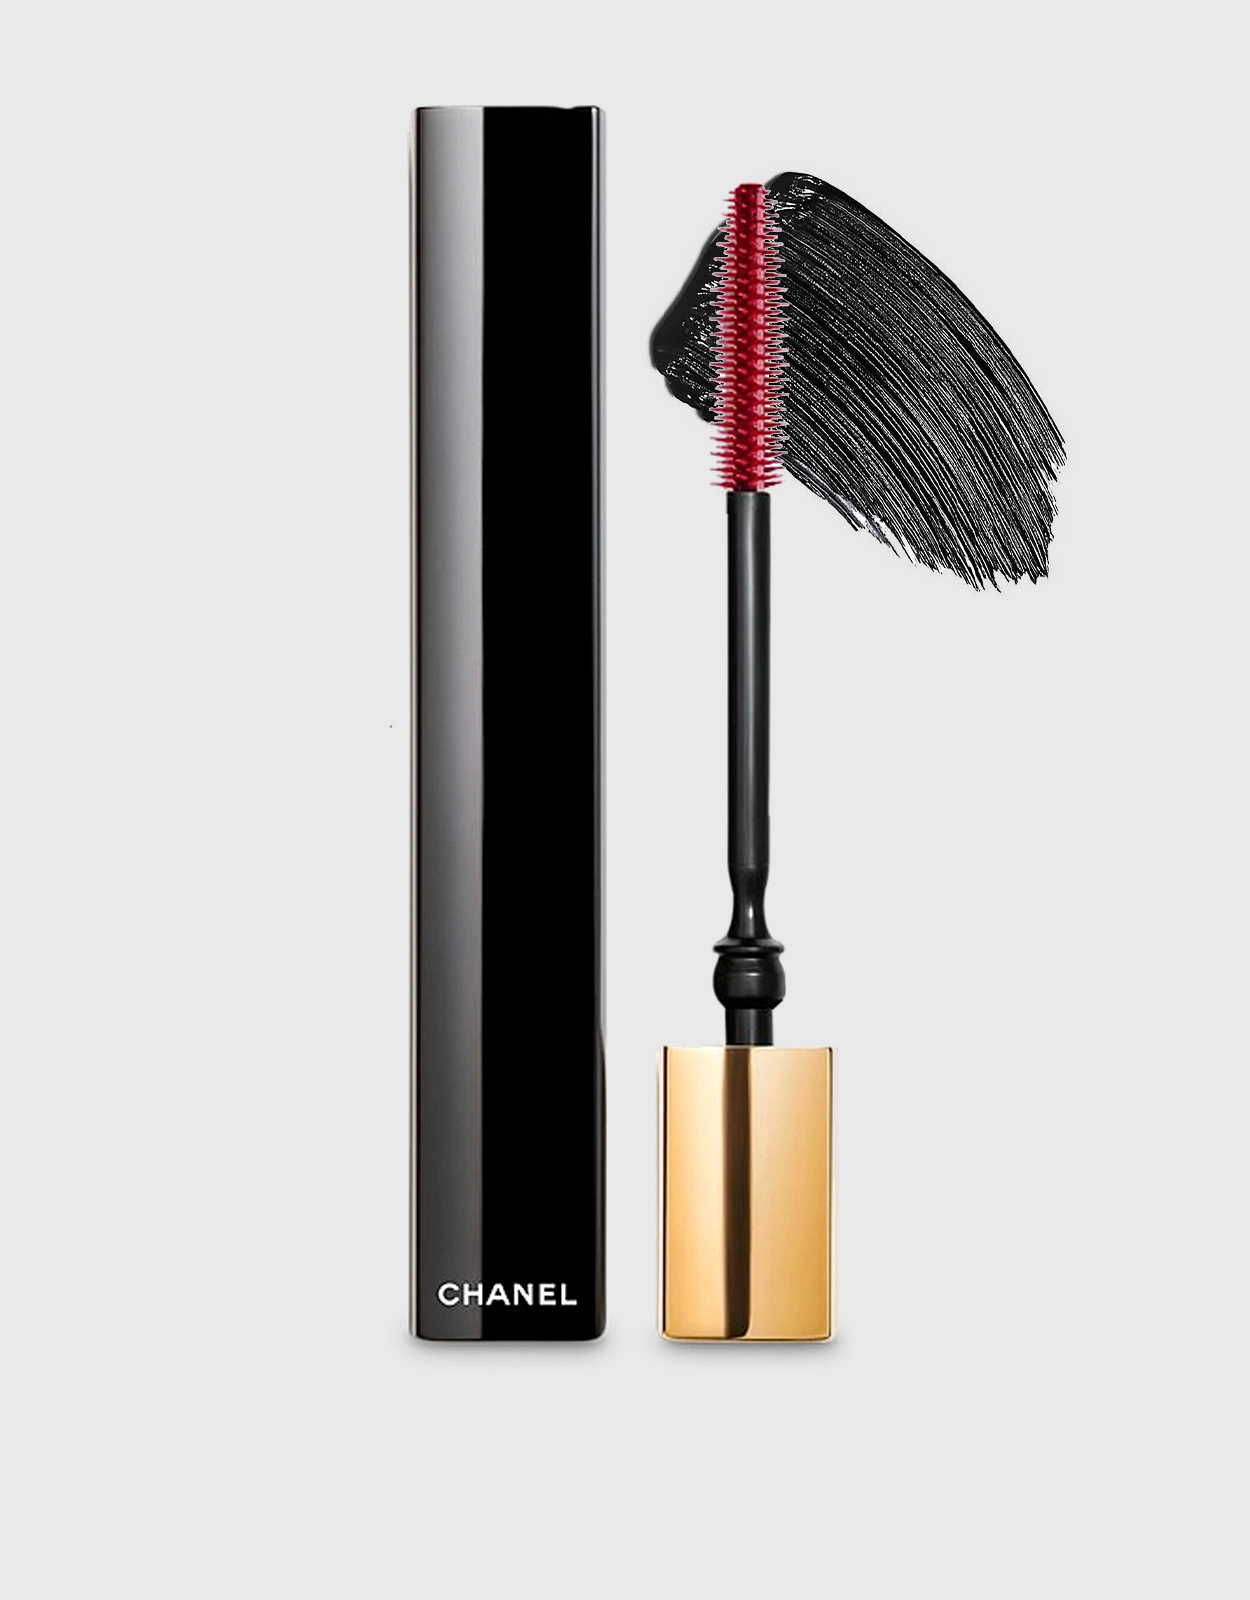 Chanel Beauty Noir Allure All-In-One Mascara: Volume Length Curl and  Definition-10 Noir (Makeup,Eye,Mascara)